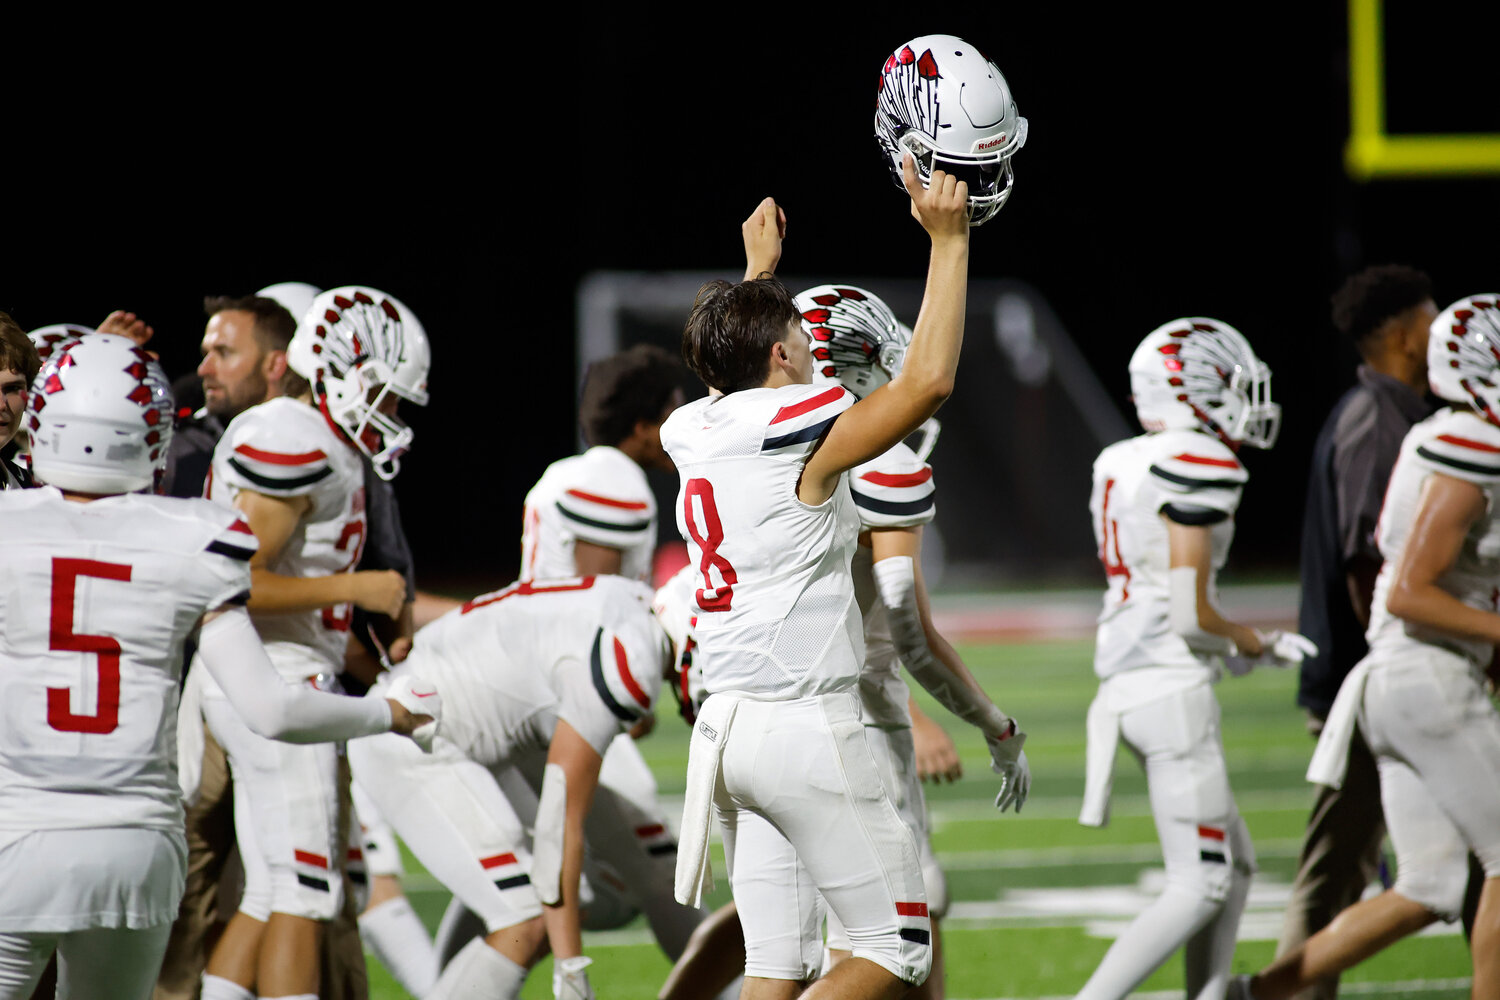 Warrenton celebrates defeating Fort Zumwalt South, Friday, Aug. 25, 2023, at Fort Zumwalt South High School in St. Peters, Mo.